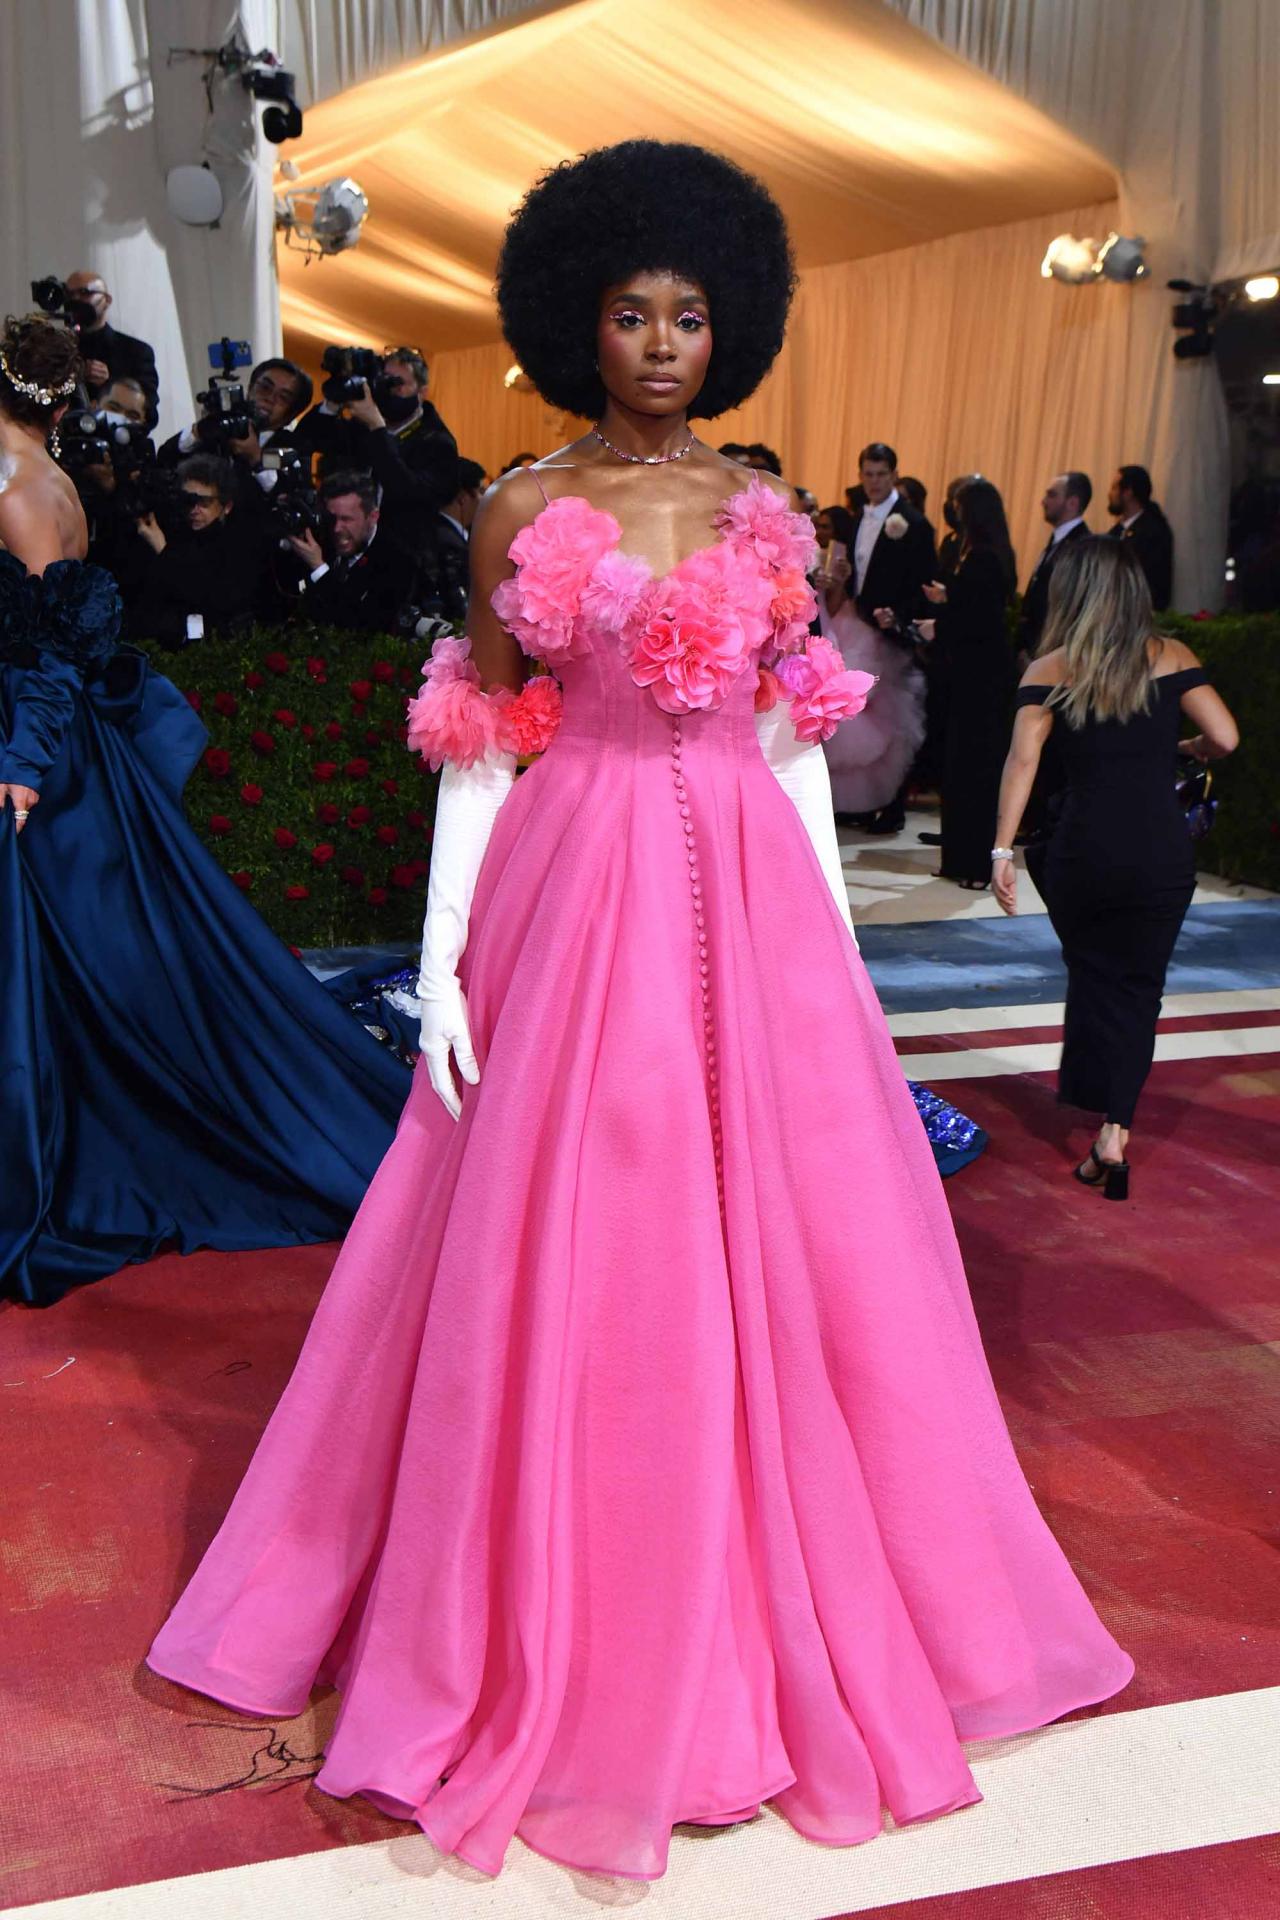 US actress Kiki Layne arrives for the 2022 Met Gala at the Metropolitan Museum of Art on May 2, 2022, in New York. - The Gala raises money for the Metropolitan Museum of Art's Costume Institute. The Gala's 2022 theme is "In America: An Anthology of Fashion". (Photo by ANGELA  WEISS / AFP)